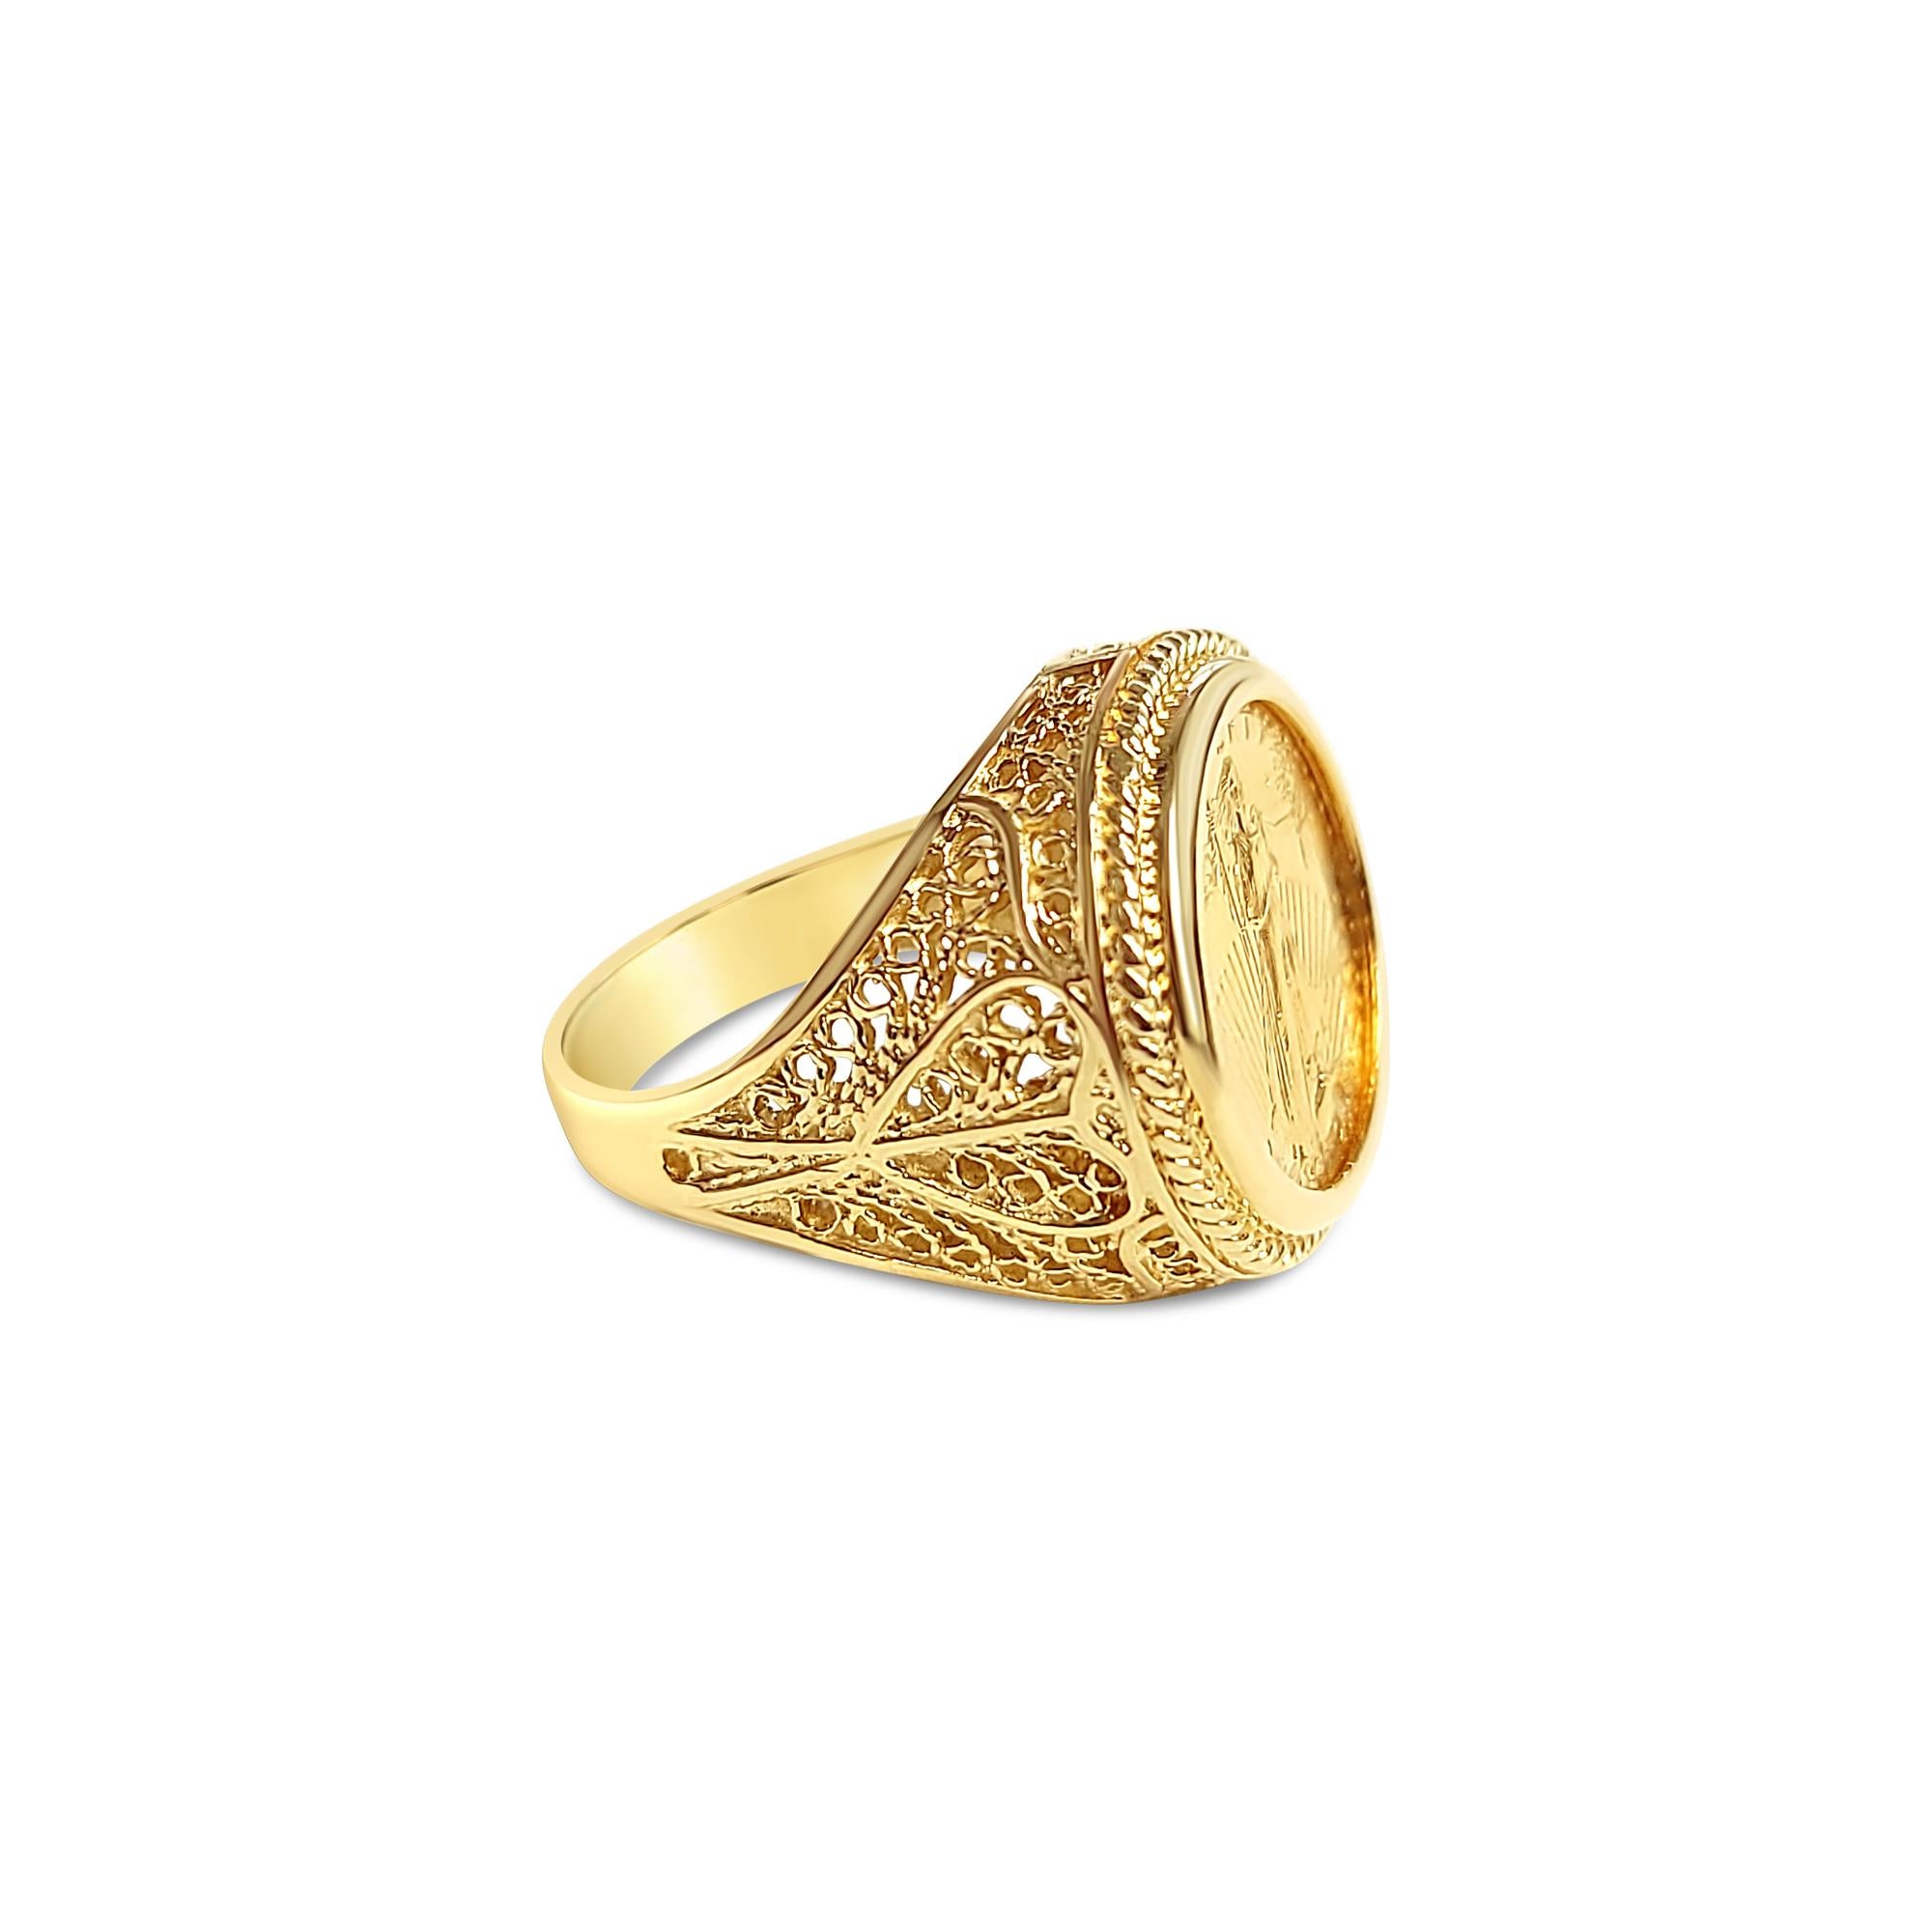 American Eagle Lady Liberty 1/10OZ 22K Fine Gold Ring with Rope & Heart Design Band

The elegant Rope & Heart Design band adds a touch of romance and sophistication to this symbolic piece. Crafted with meticulous artistry, this ring is a timeless